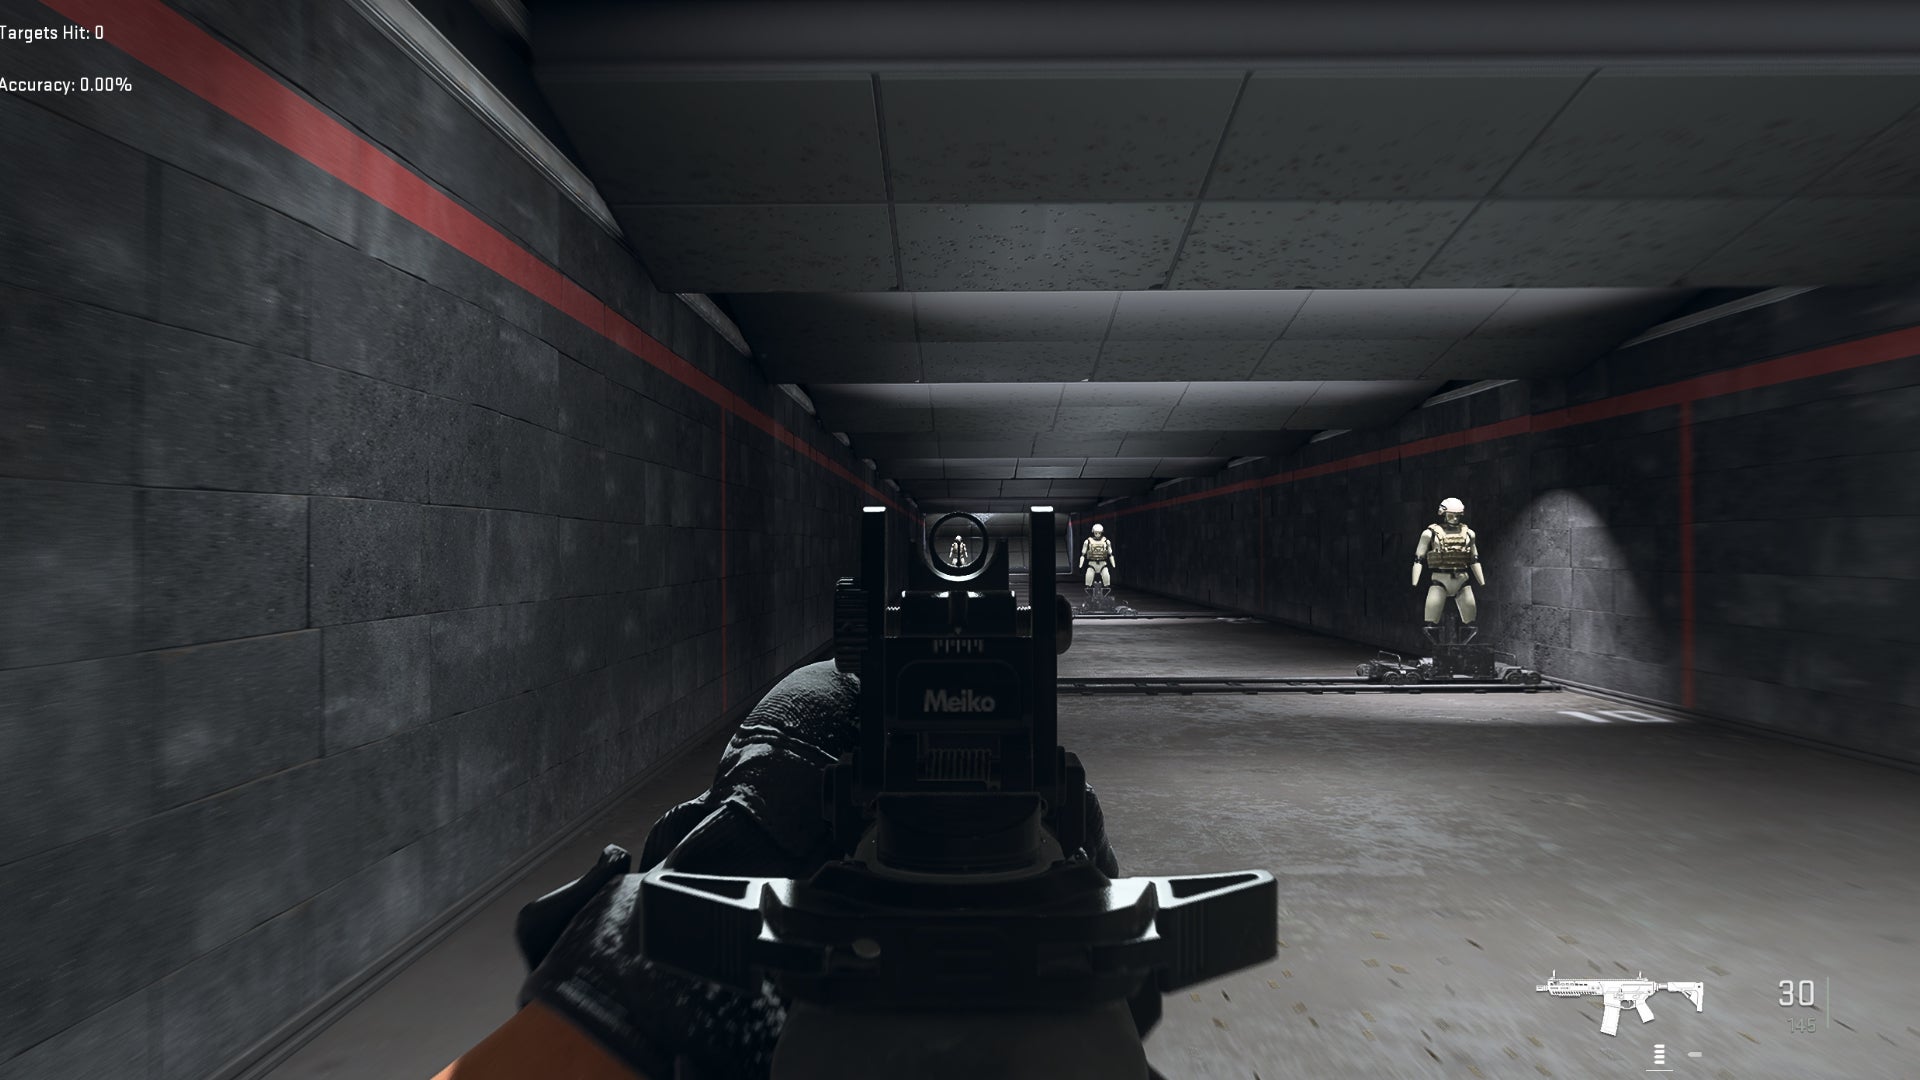 The player in Warzone 2.0 aims at a training dummy with the M13B ironsights.